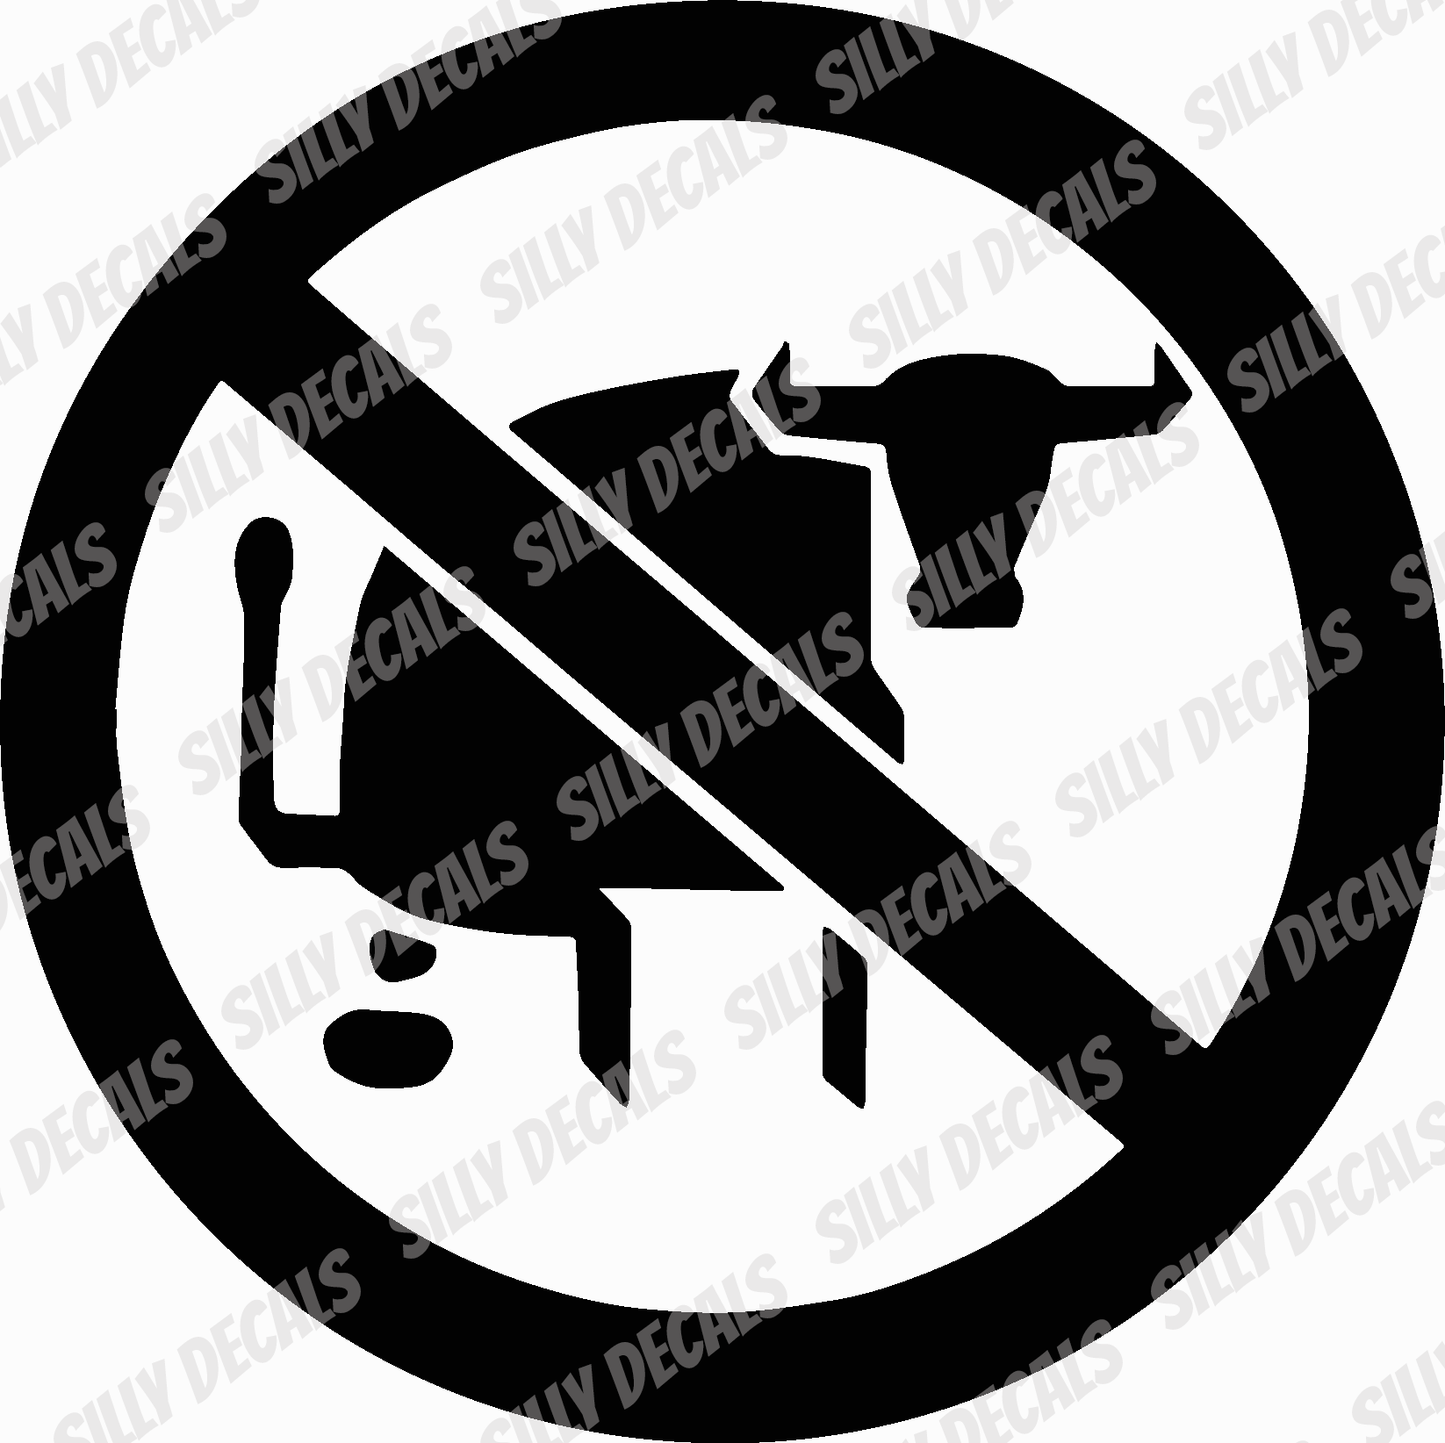 No Bullshit; Funny Vinyl Decals Suitable For Cars, Windows, Walls, and More!